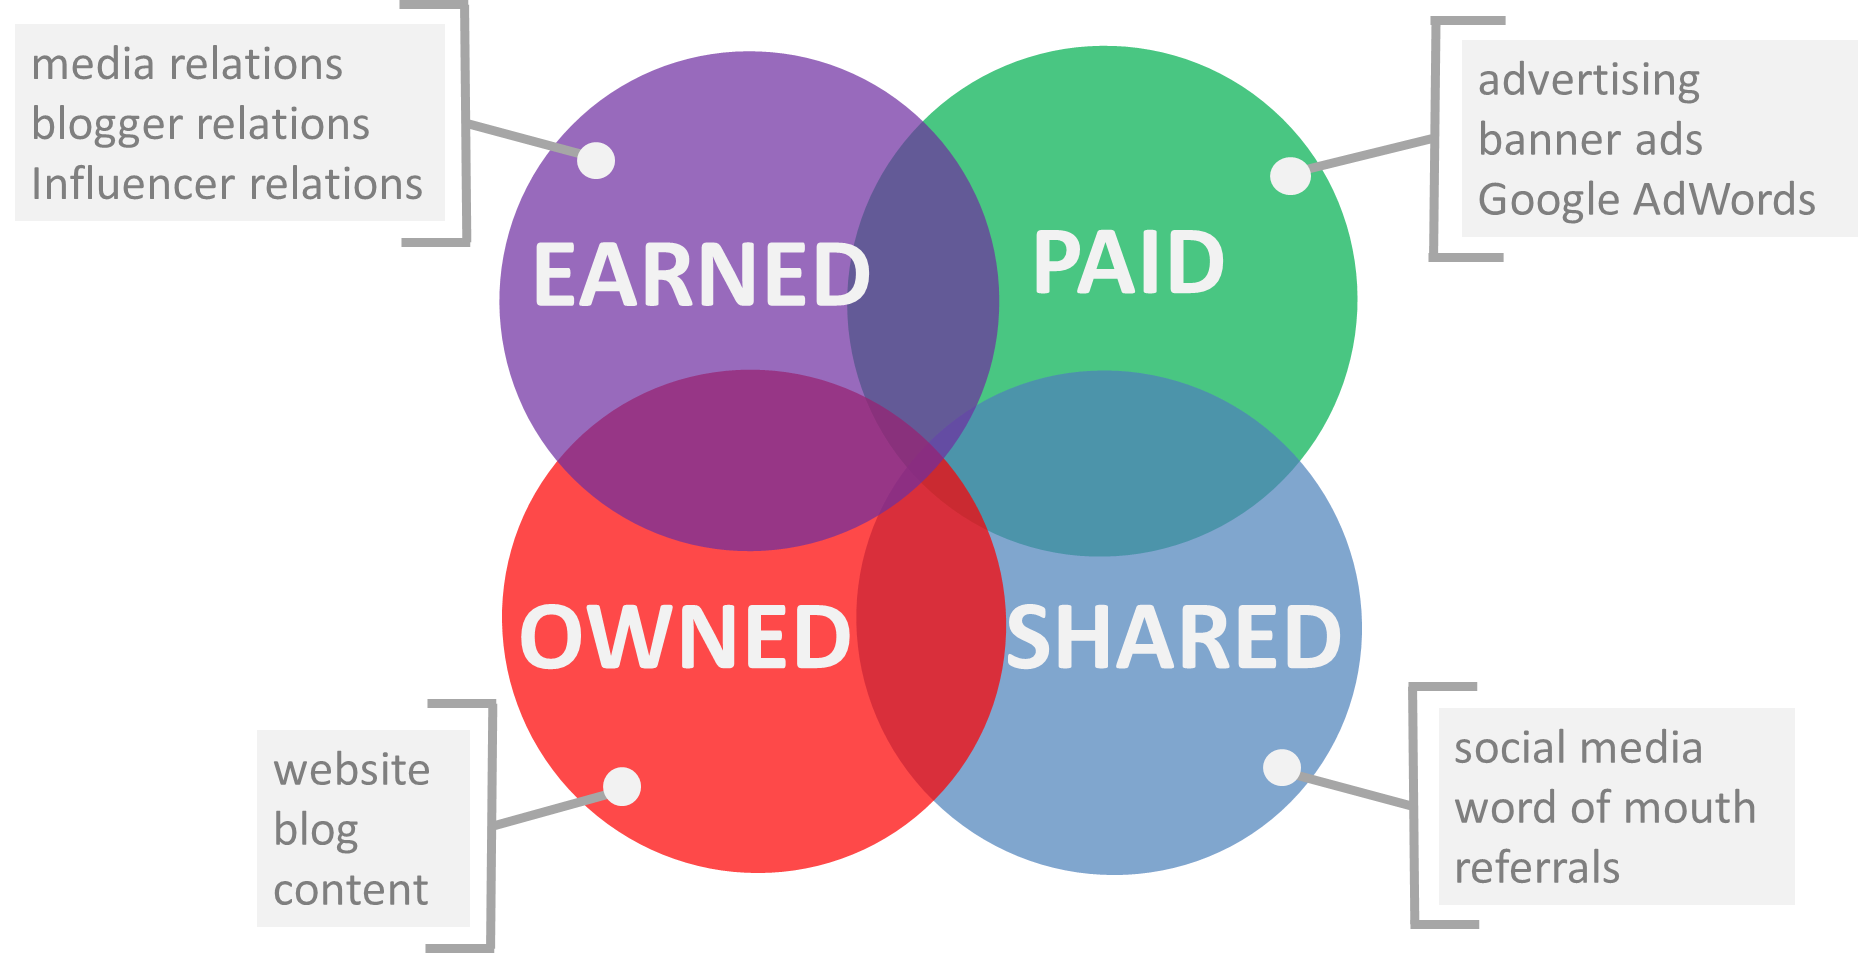 Marketing channels are comprised of owned, earned, and paid channels, and content calendar features should handle all types.